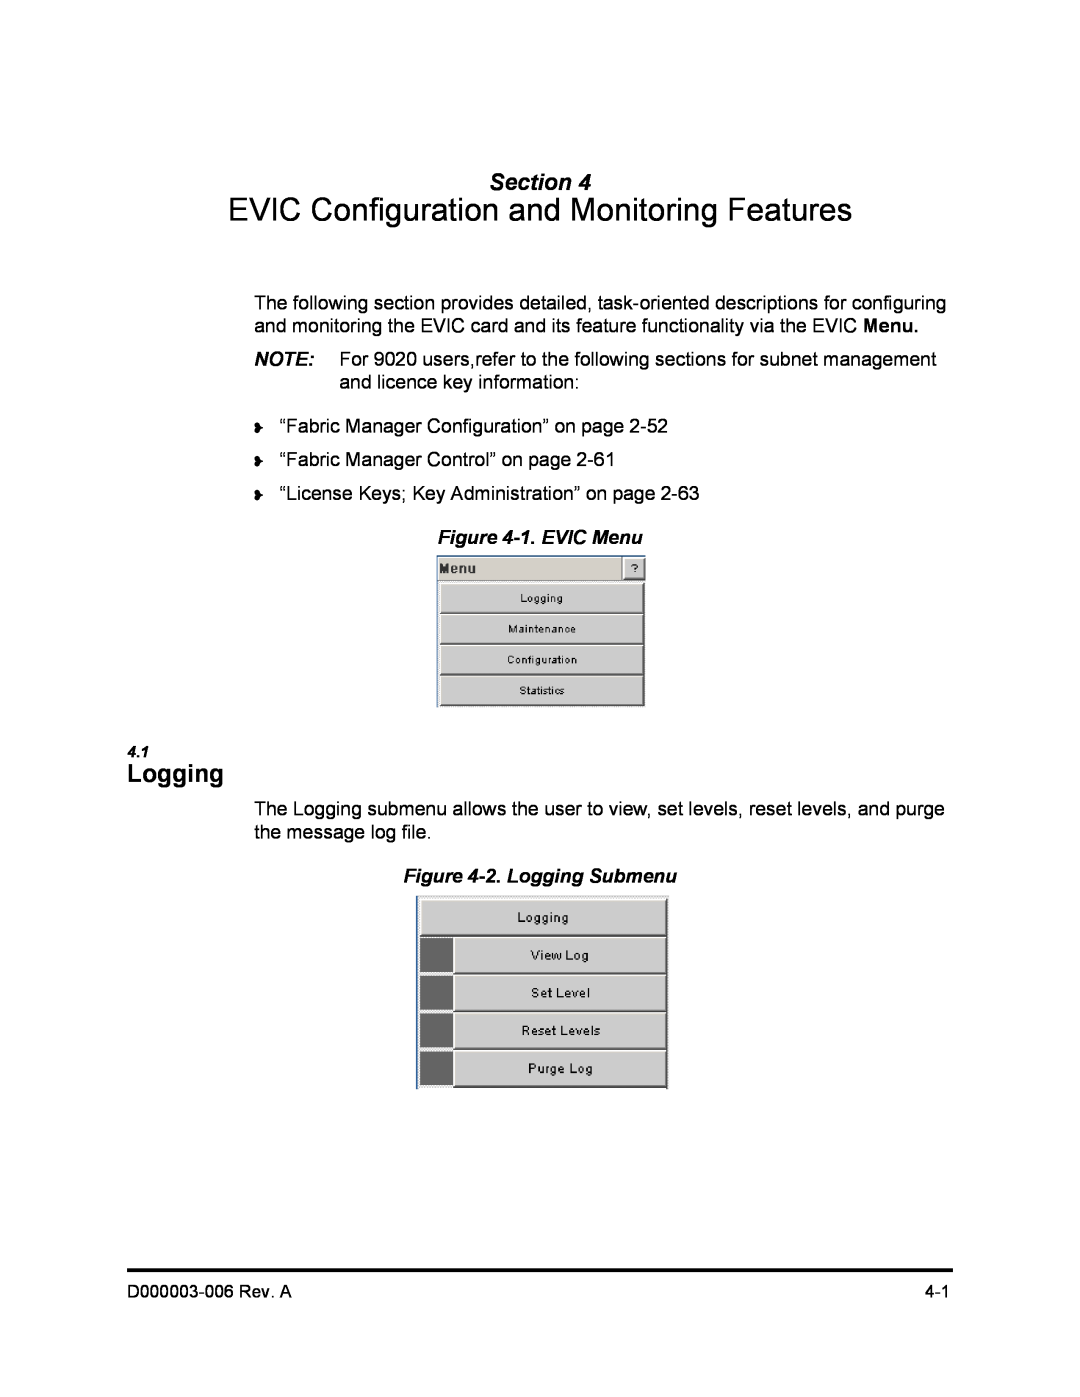 Q-Logic 9000 manual EVIC Configuration and Monitoring Features, 1. EVIC Menu, 2. Logging Submenu, Section 